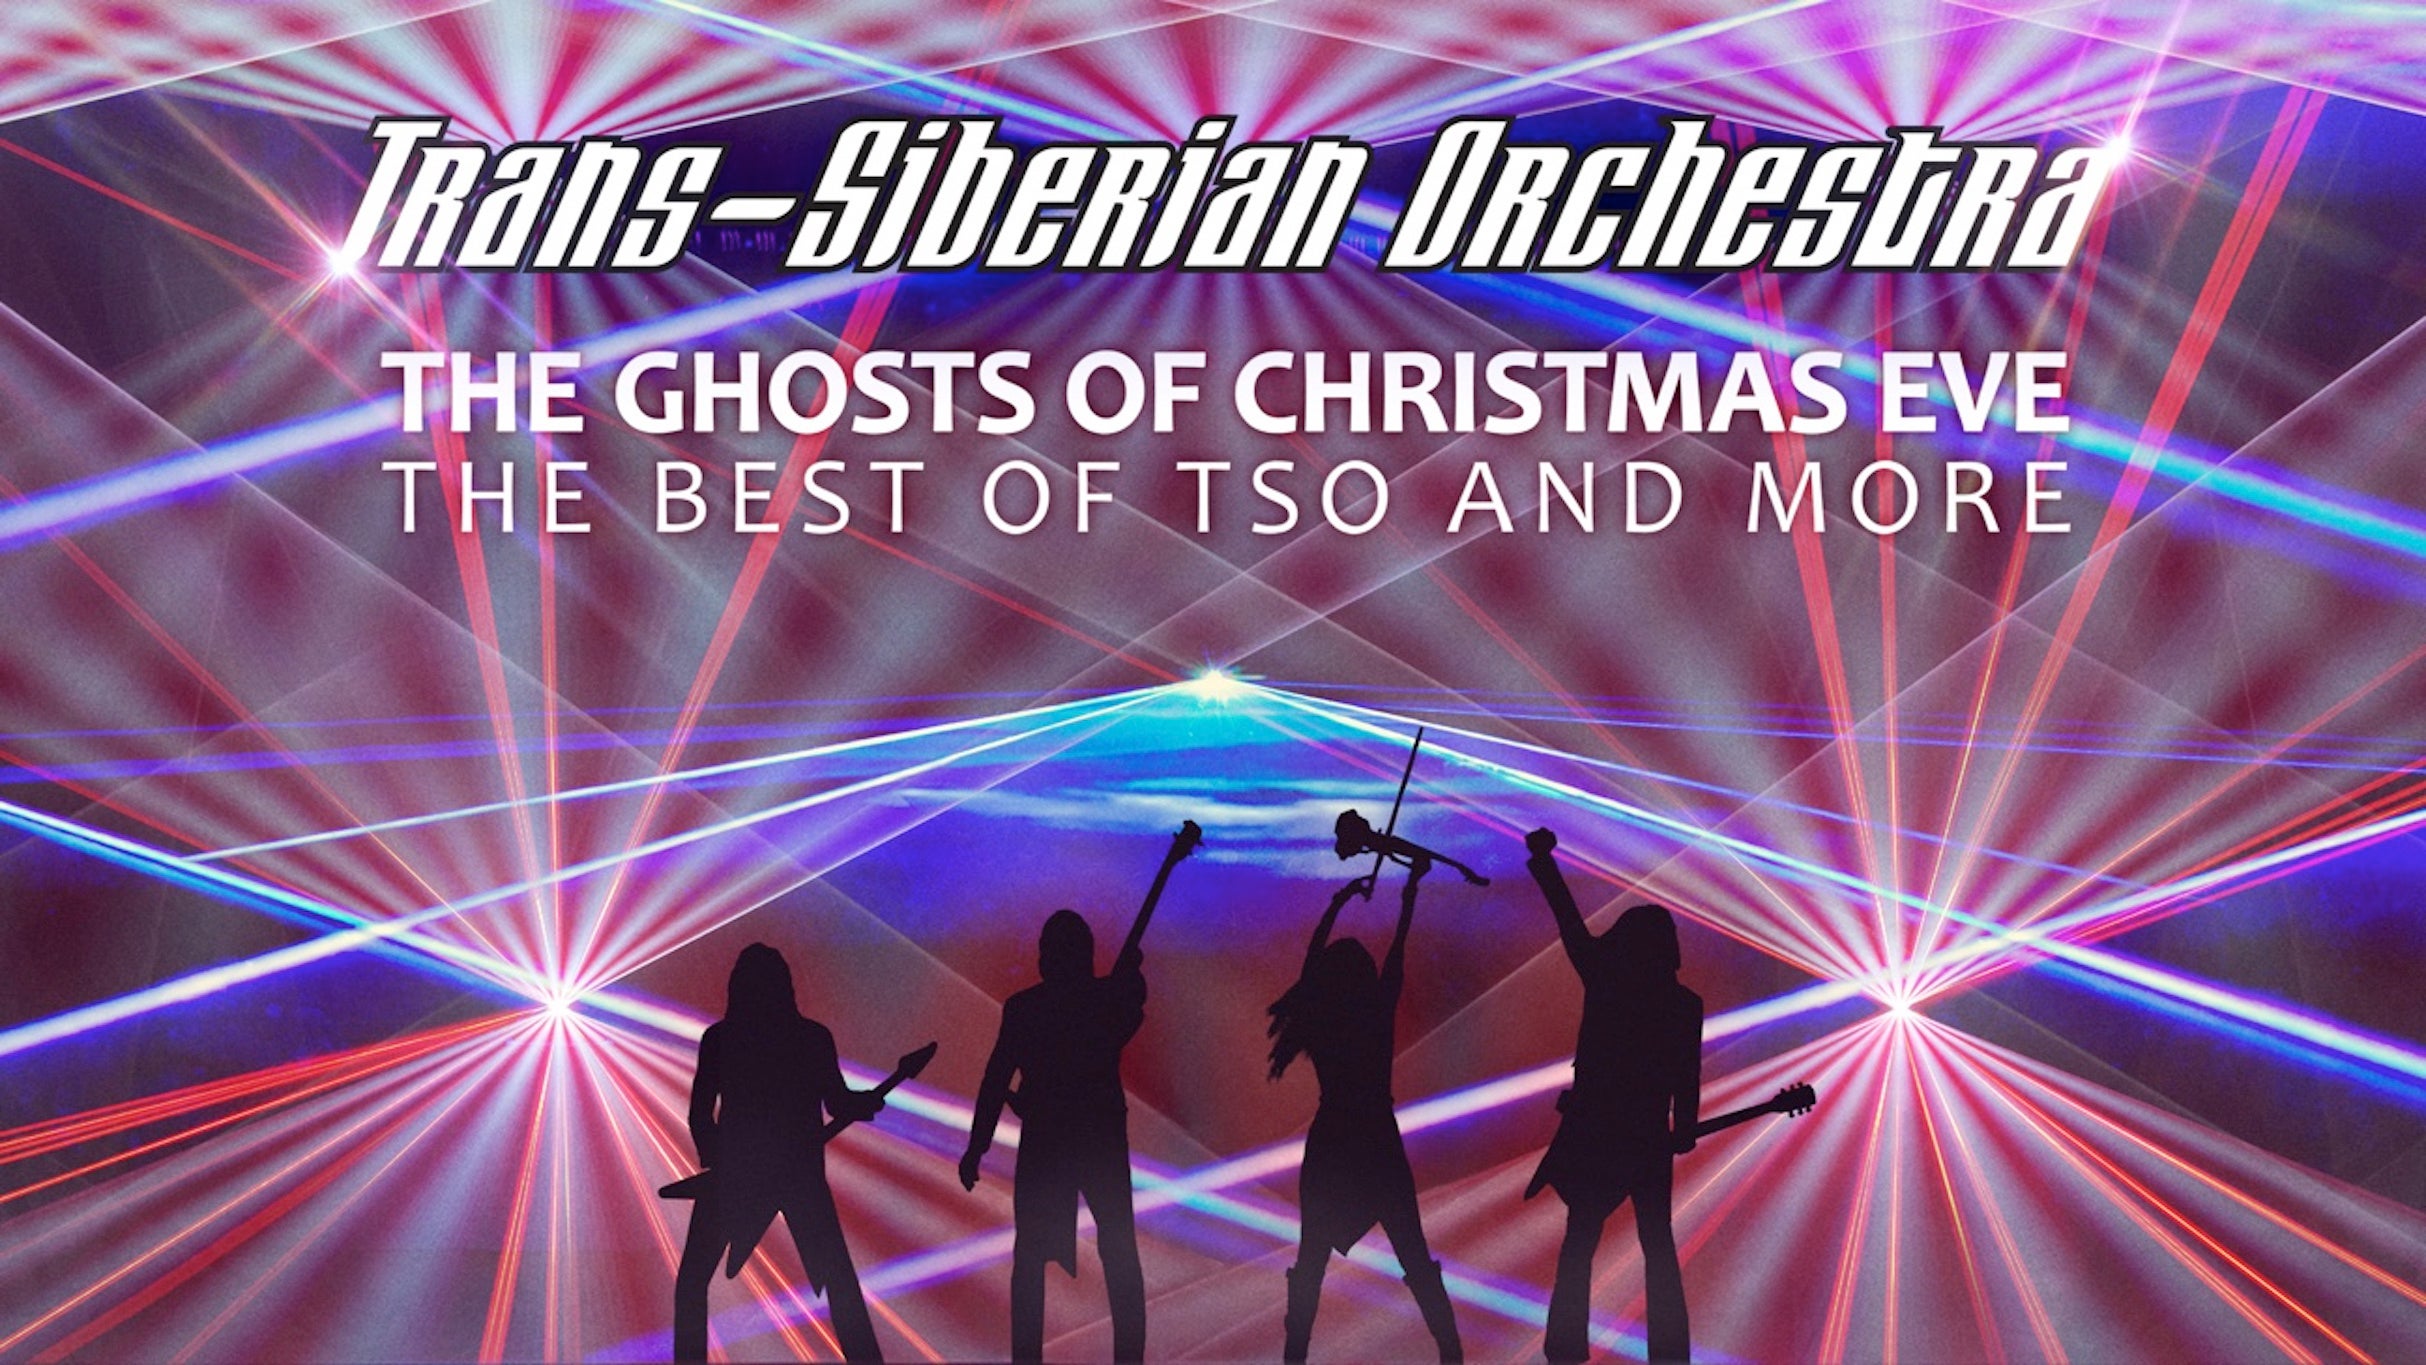 Trans-Siberian Orchestra - The Ghosts Of Christmas Eve free presale code for early tickets in Oklahoma City